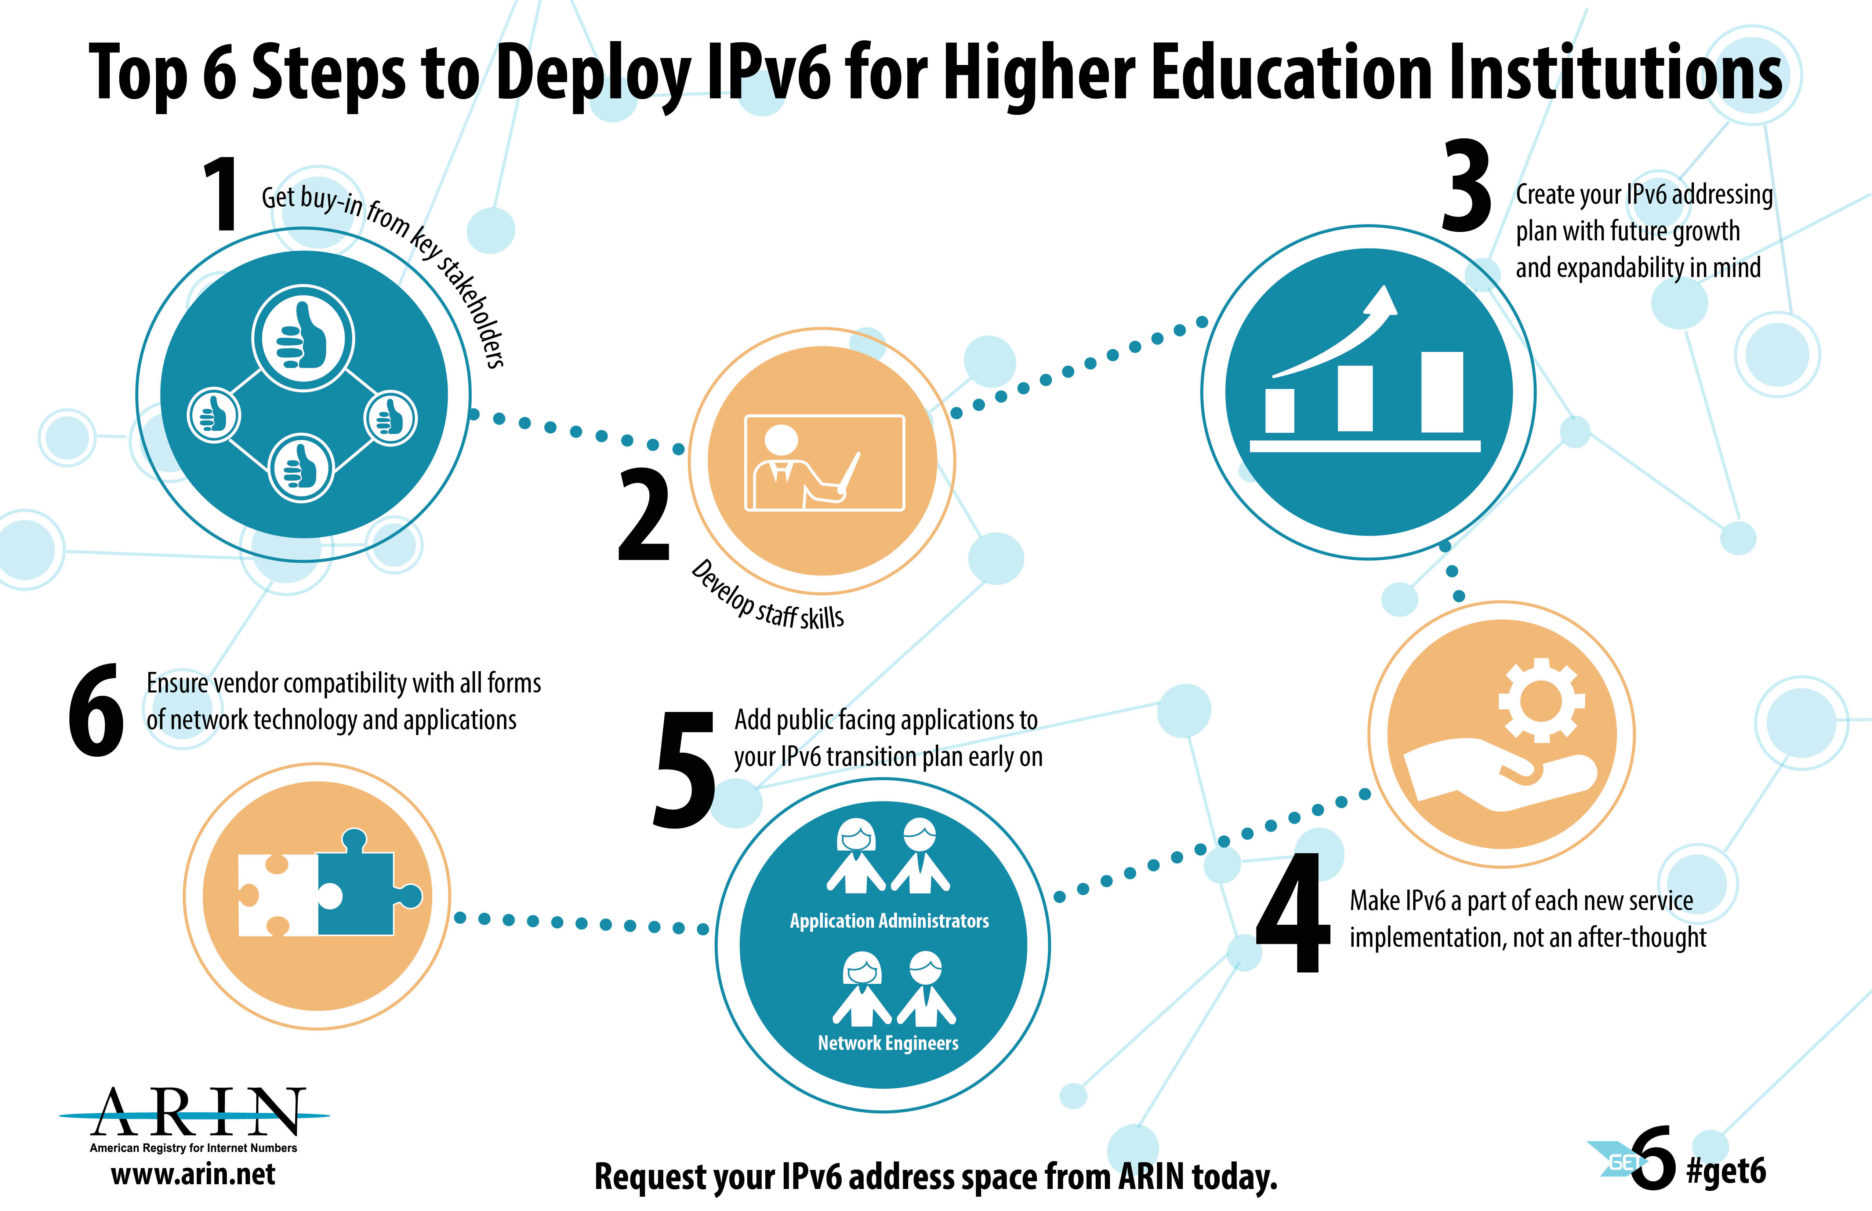 A list of steps for deploying IPv6 in higher education institutions